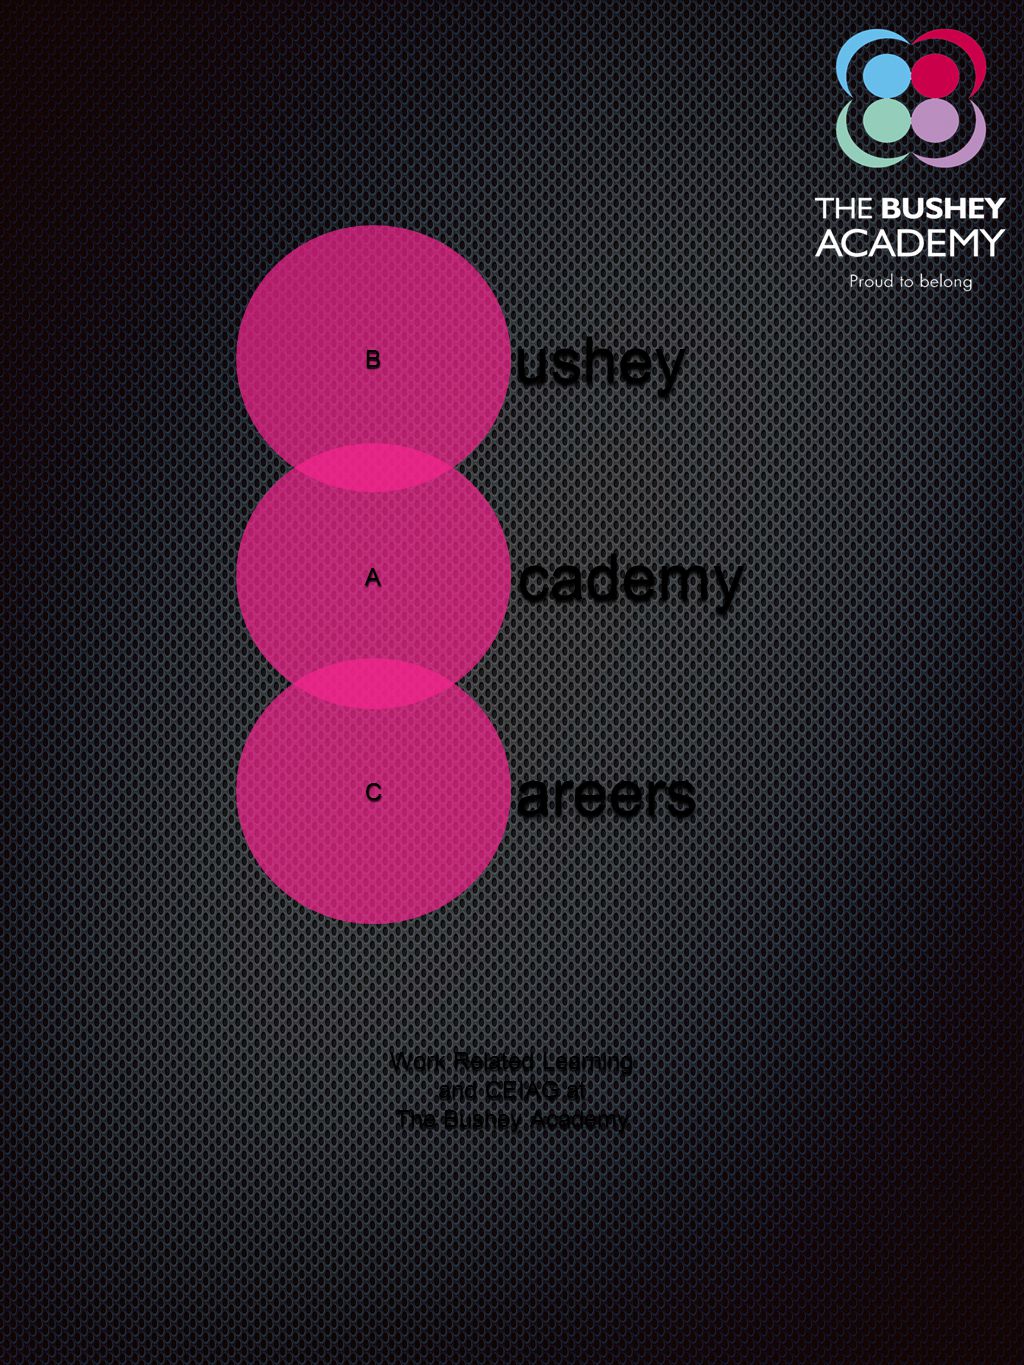 B A C ushey cademy areers Work Related Learning and CEIAG at The Bushey Academy